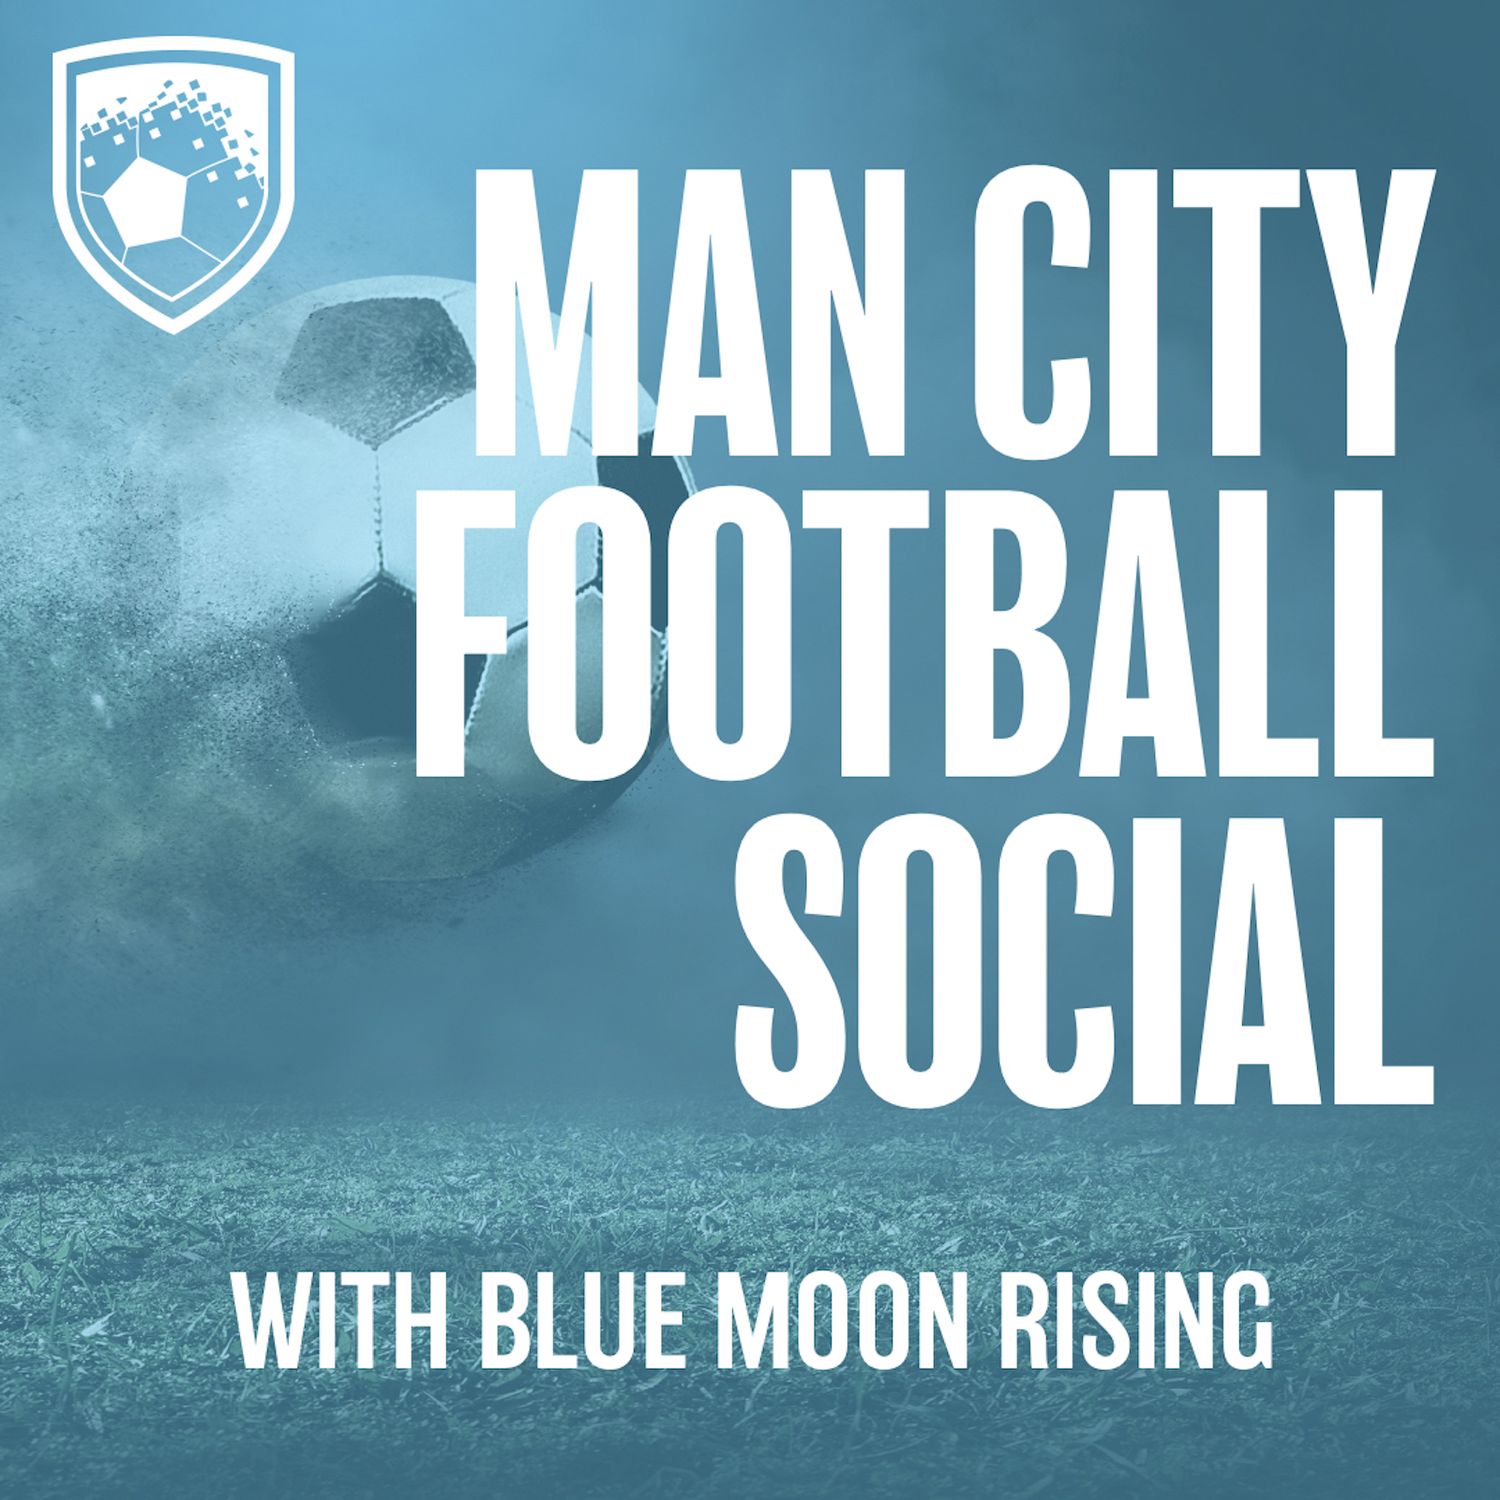 cover art for Manchester City Football Social - Double header Spurs game difficult and rising ticket prices to grow to potential crazy heights?